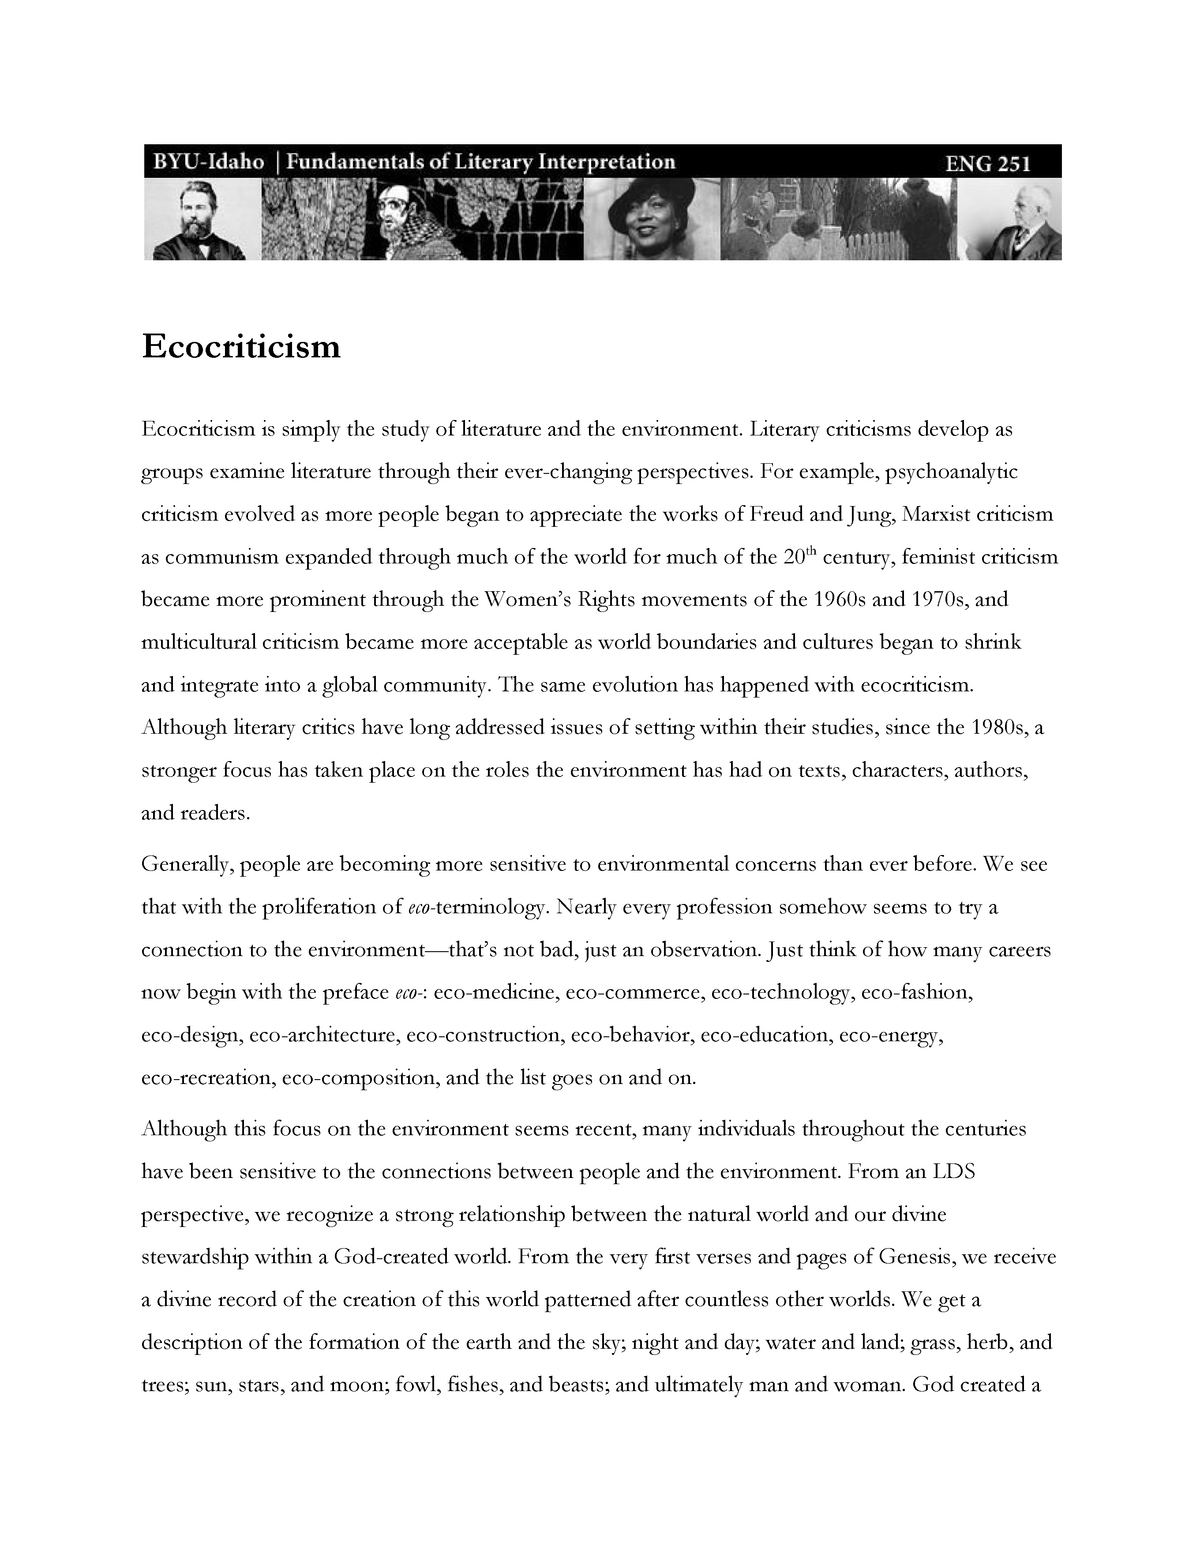 thesis on ecocriticism pdf